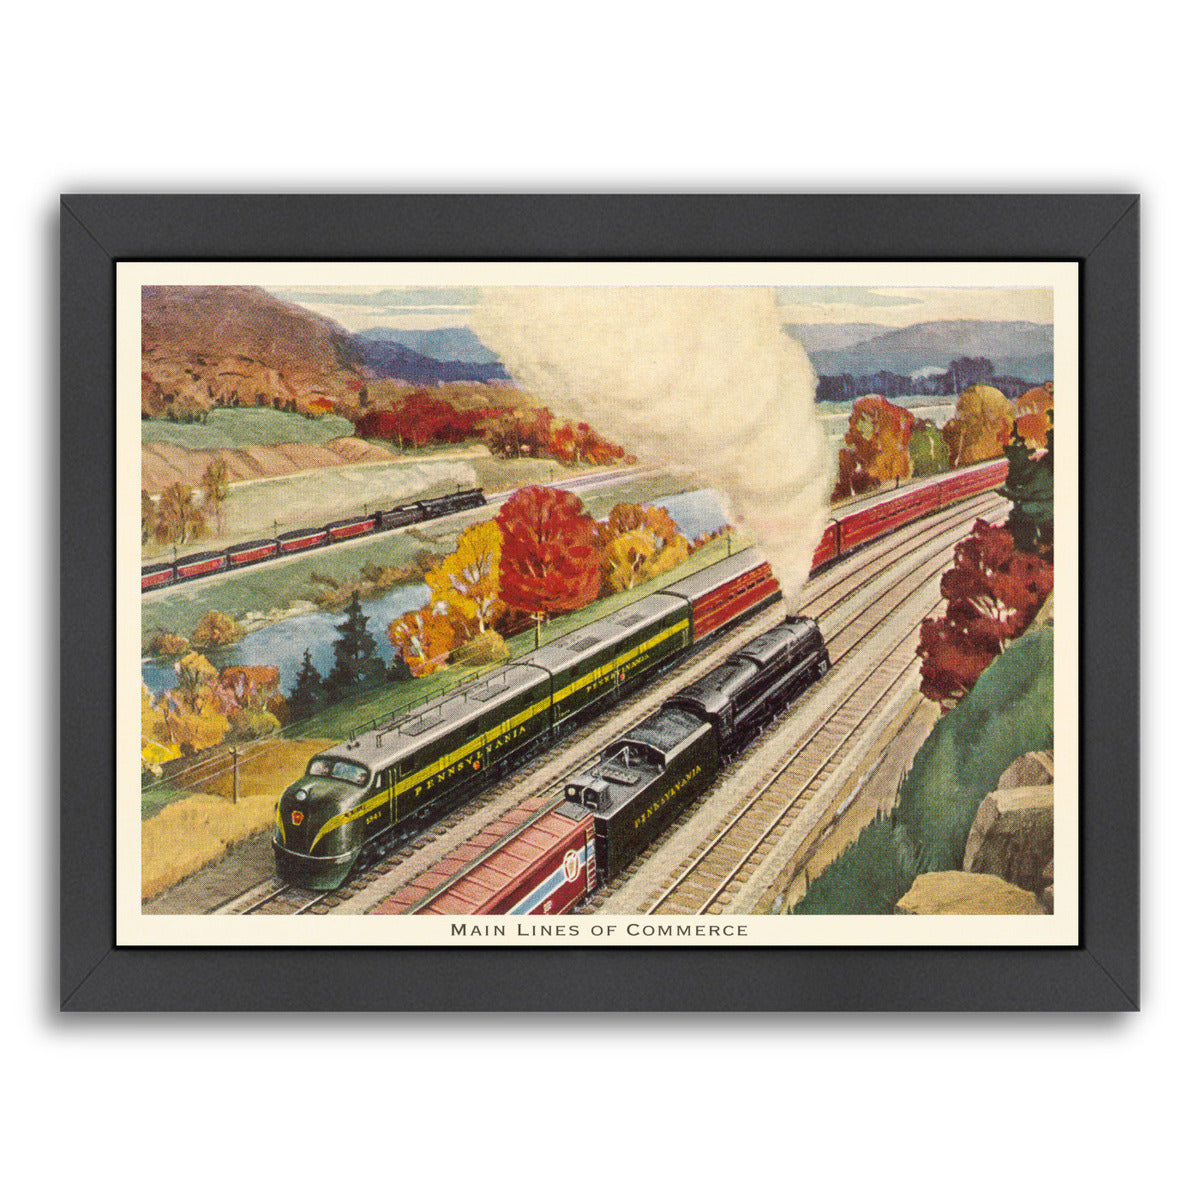 Main Lines Of Commerce by Found Image Press Framed Print - Americanflat